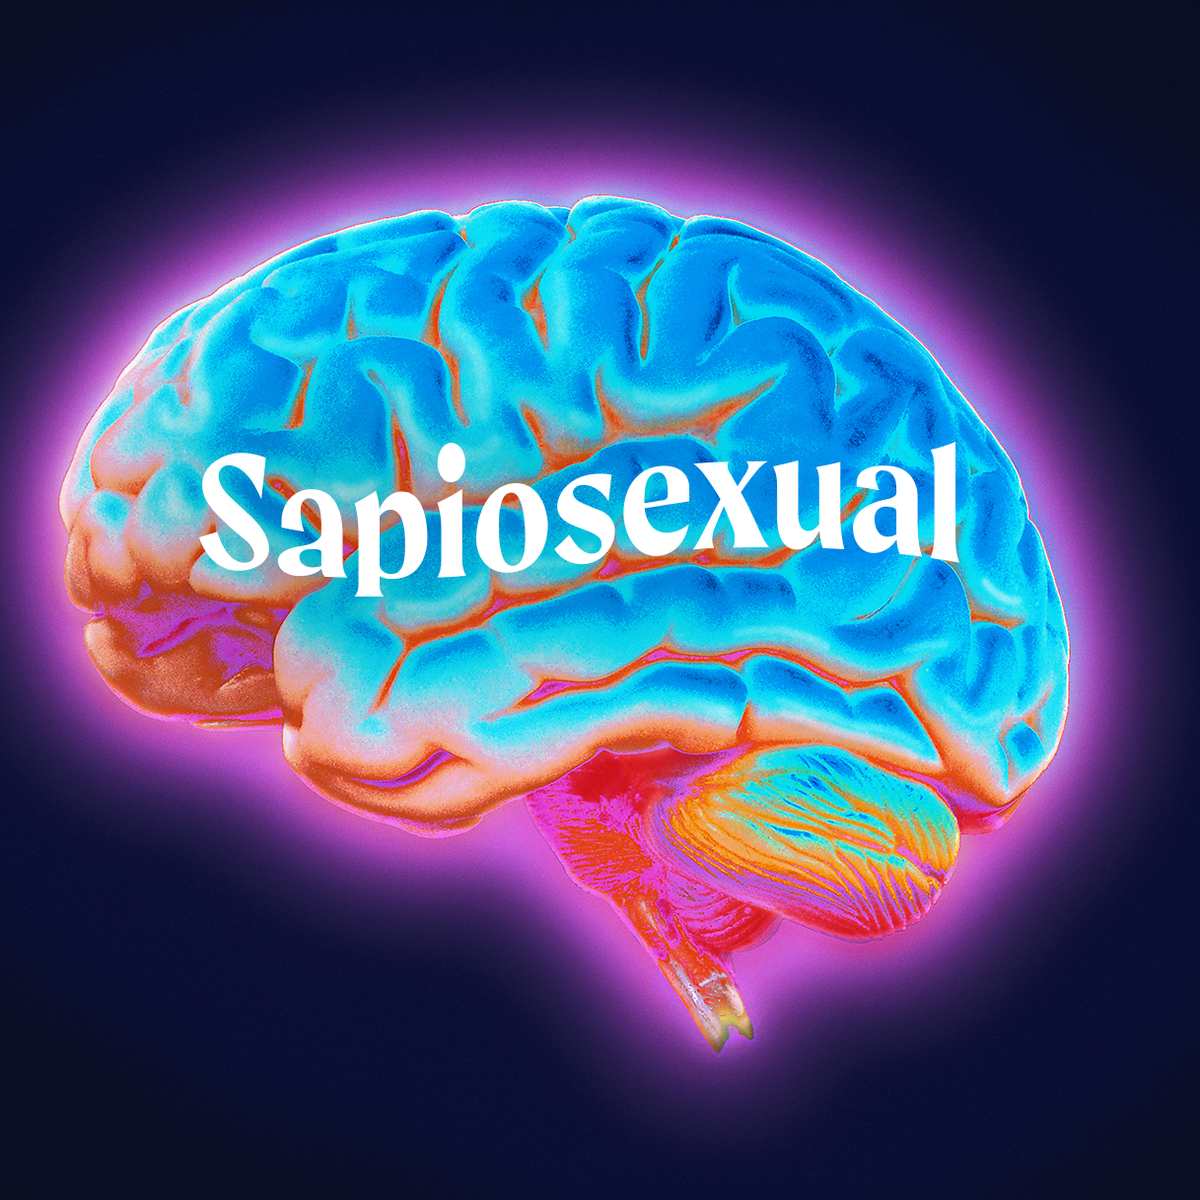 Sapiosexual Definition and Meaning - What Is Sapiosexuality?